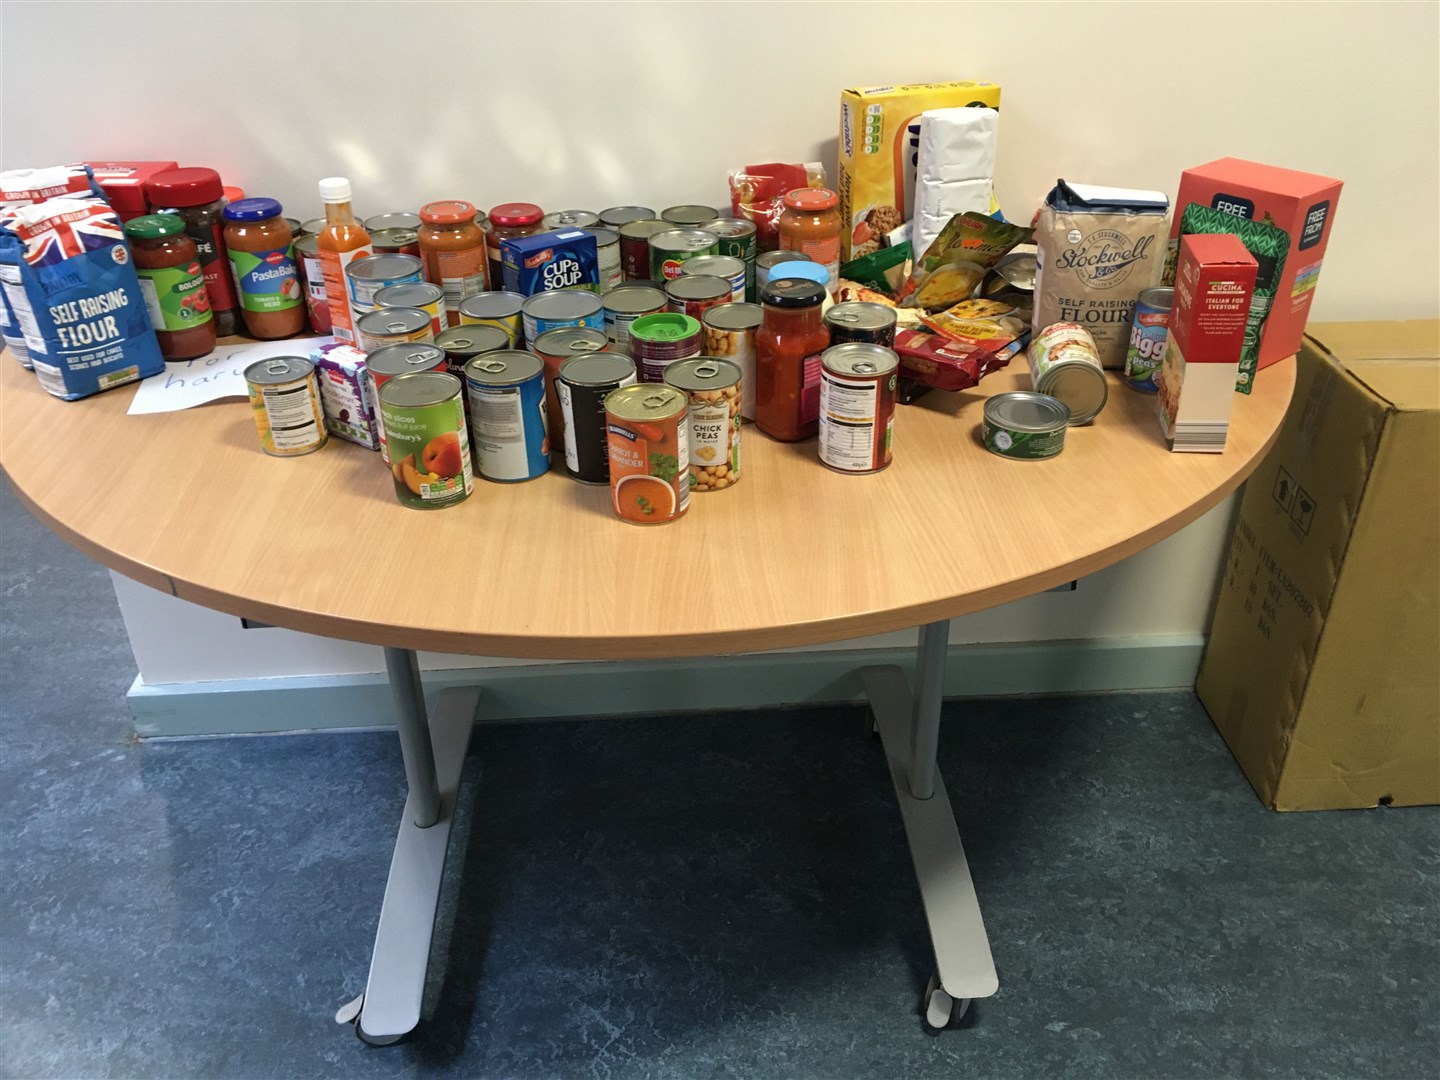 A primary school is collecting donations of food to be distributed to families in need (University of Bristol/PA)